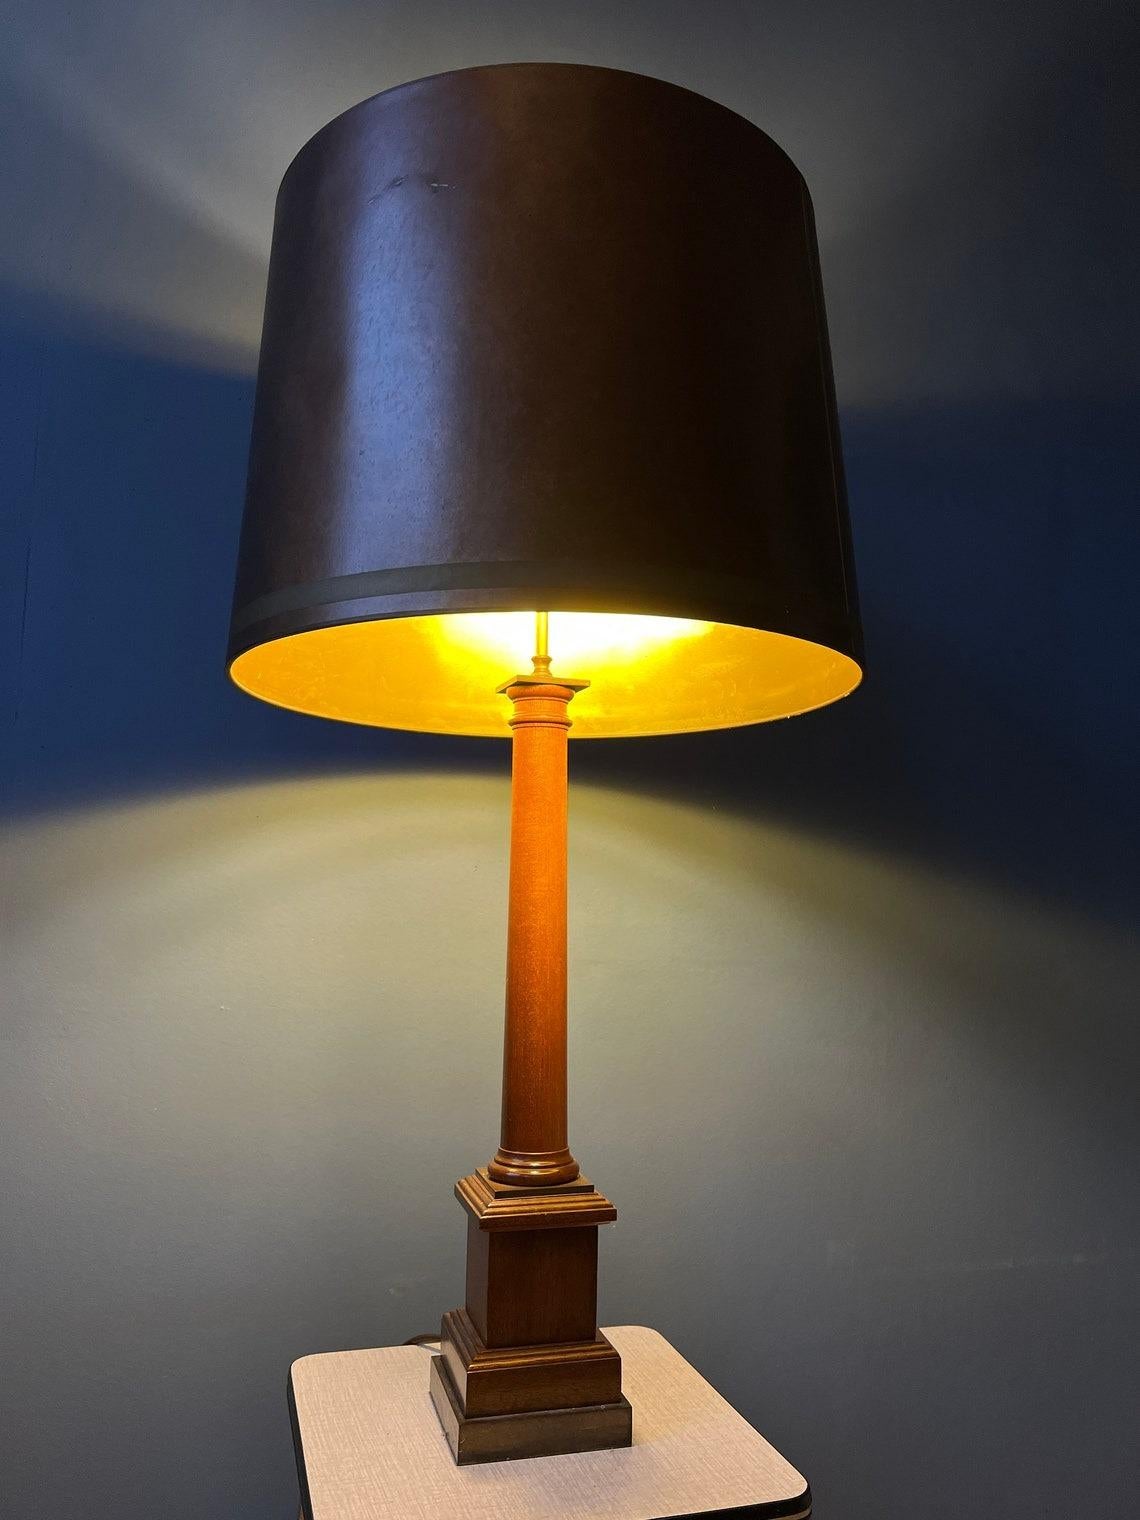 Big eclectic vintage table lamp wooden base and copper coloured shade. The lamp requires two E27/26 lightbulbs and currently has an EU-plug.

Additional information:
Materials: Fabric, wood
Period: 1970s
Dimensions: ø Shade: 38 cm
Height Shade: 66